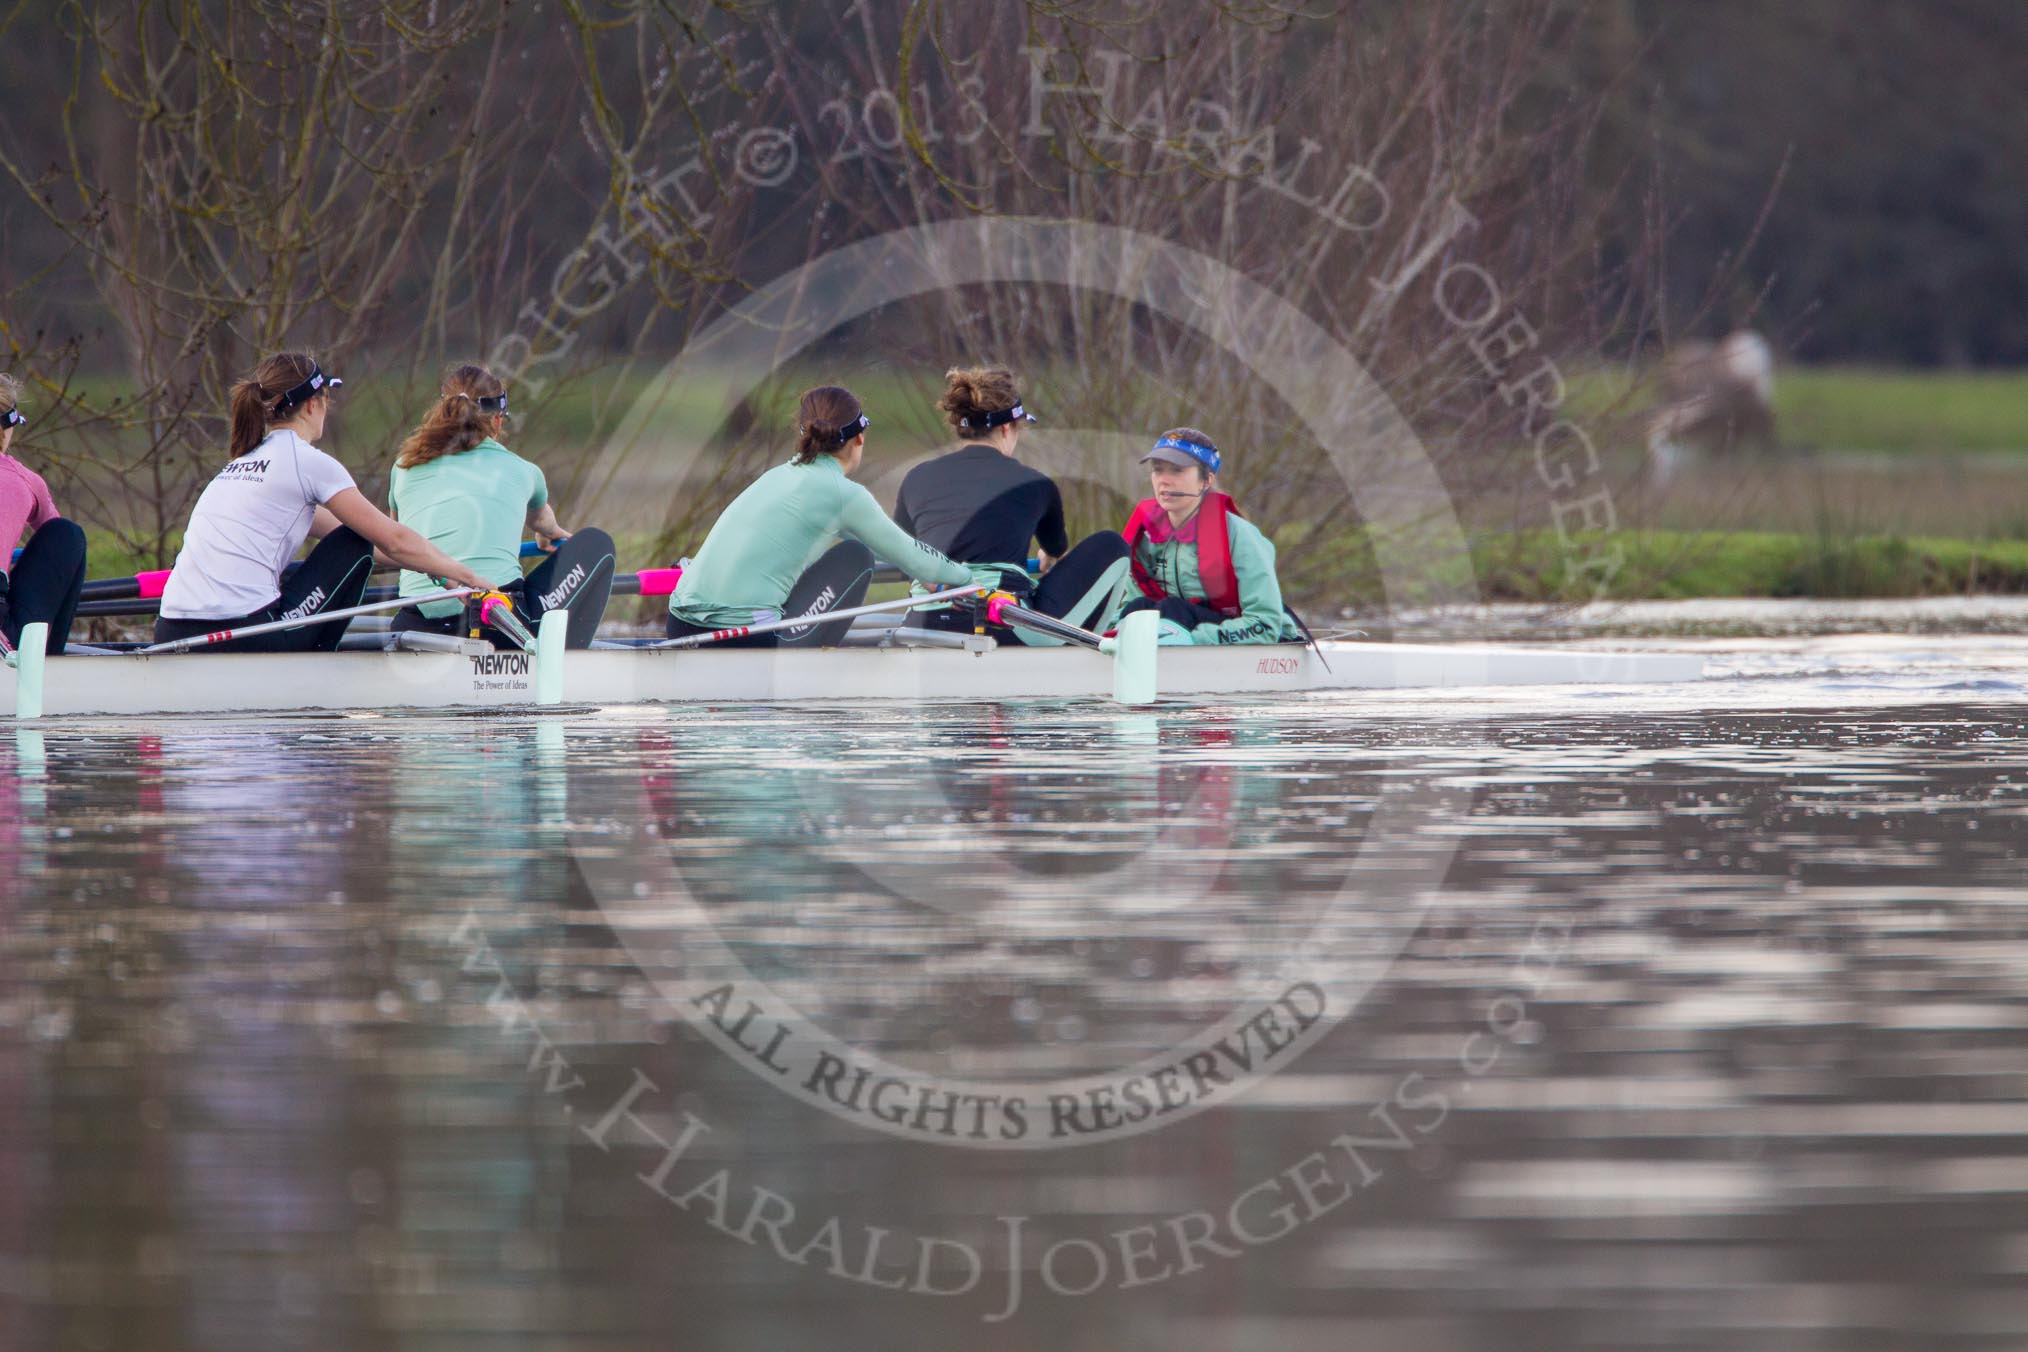 The Boat Race season 2013 - CUWBC training: The CUWBC Blue Boat on the way back from Temple Island to Henley: In the 4 seat Lucy Griffin, 5 Sara Lackner, 6 Helena Schofield, 7 Christine Seeliger, stroke Katie-Jane Whitlock, and cox Arav Gupta..
River Thames near Remenham,
Henley-on-Thames,
Oxfordshire,
United Kingdom,
on 19 March 2013 at 15:38, image #58